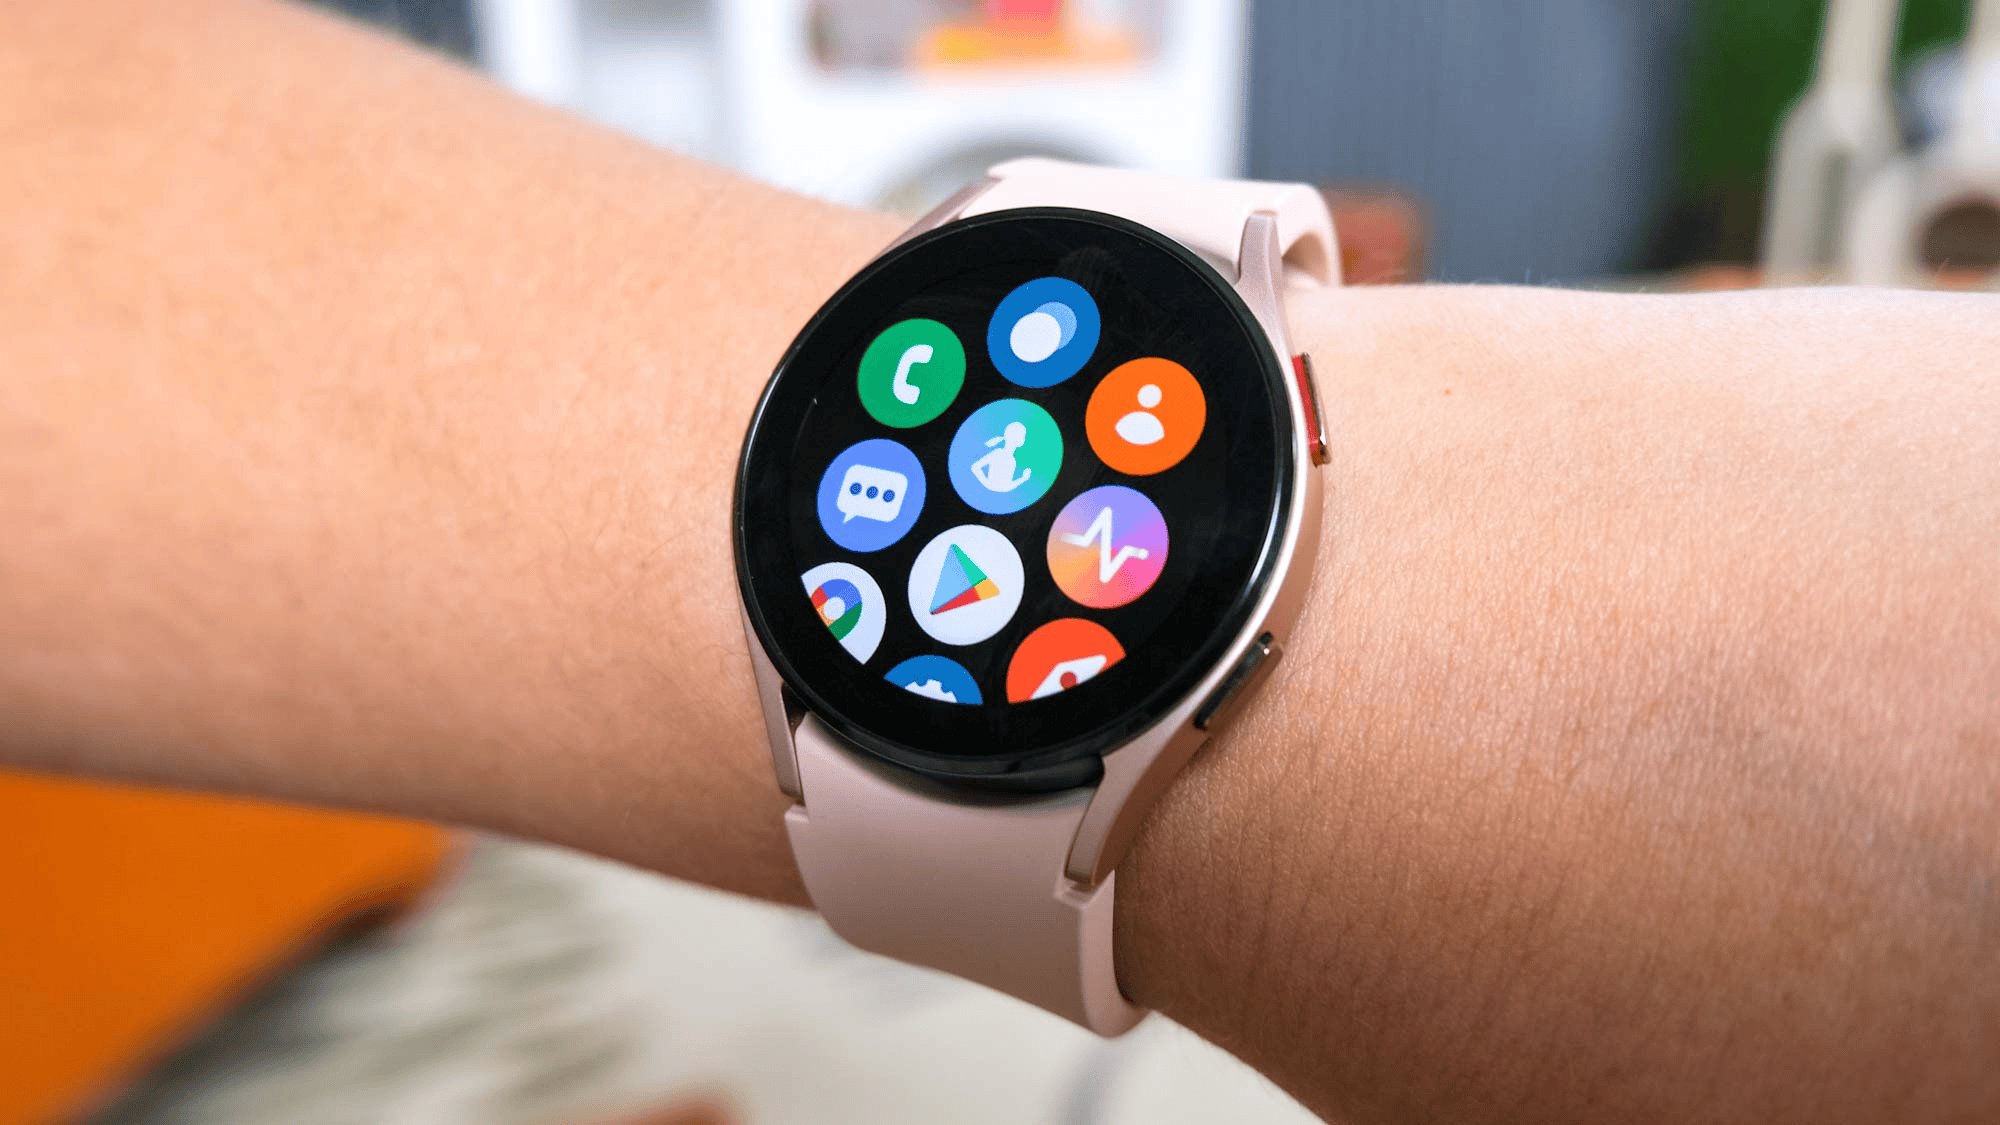  Google Pixel Watch announced, to launch with Pixel 7 smartphone